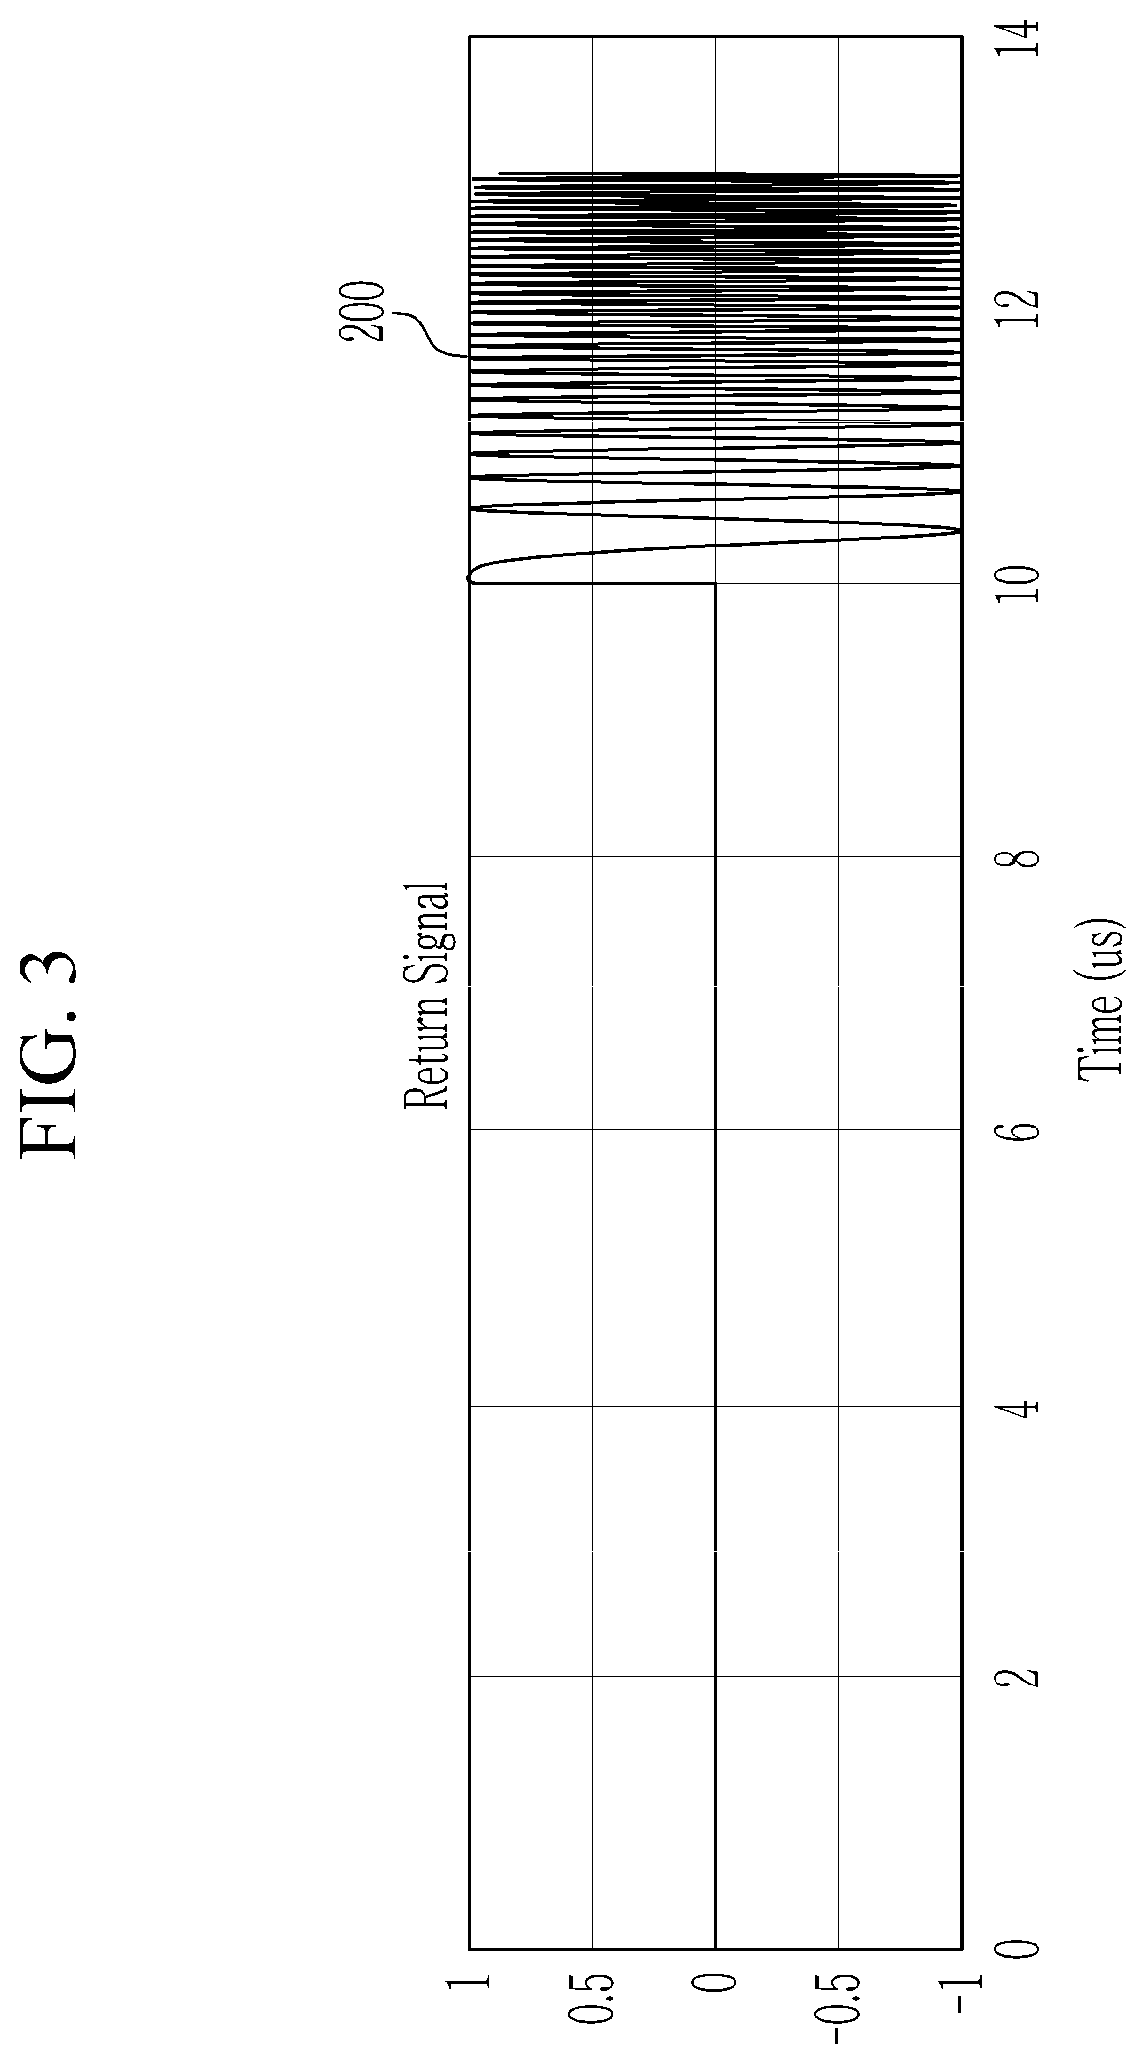 Chirp noise generation device and method for compression pulse signal